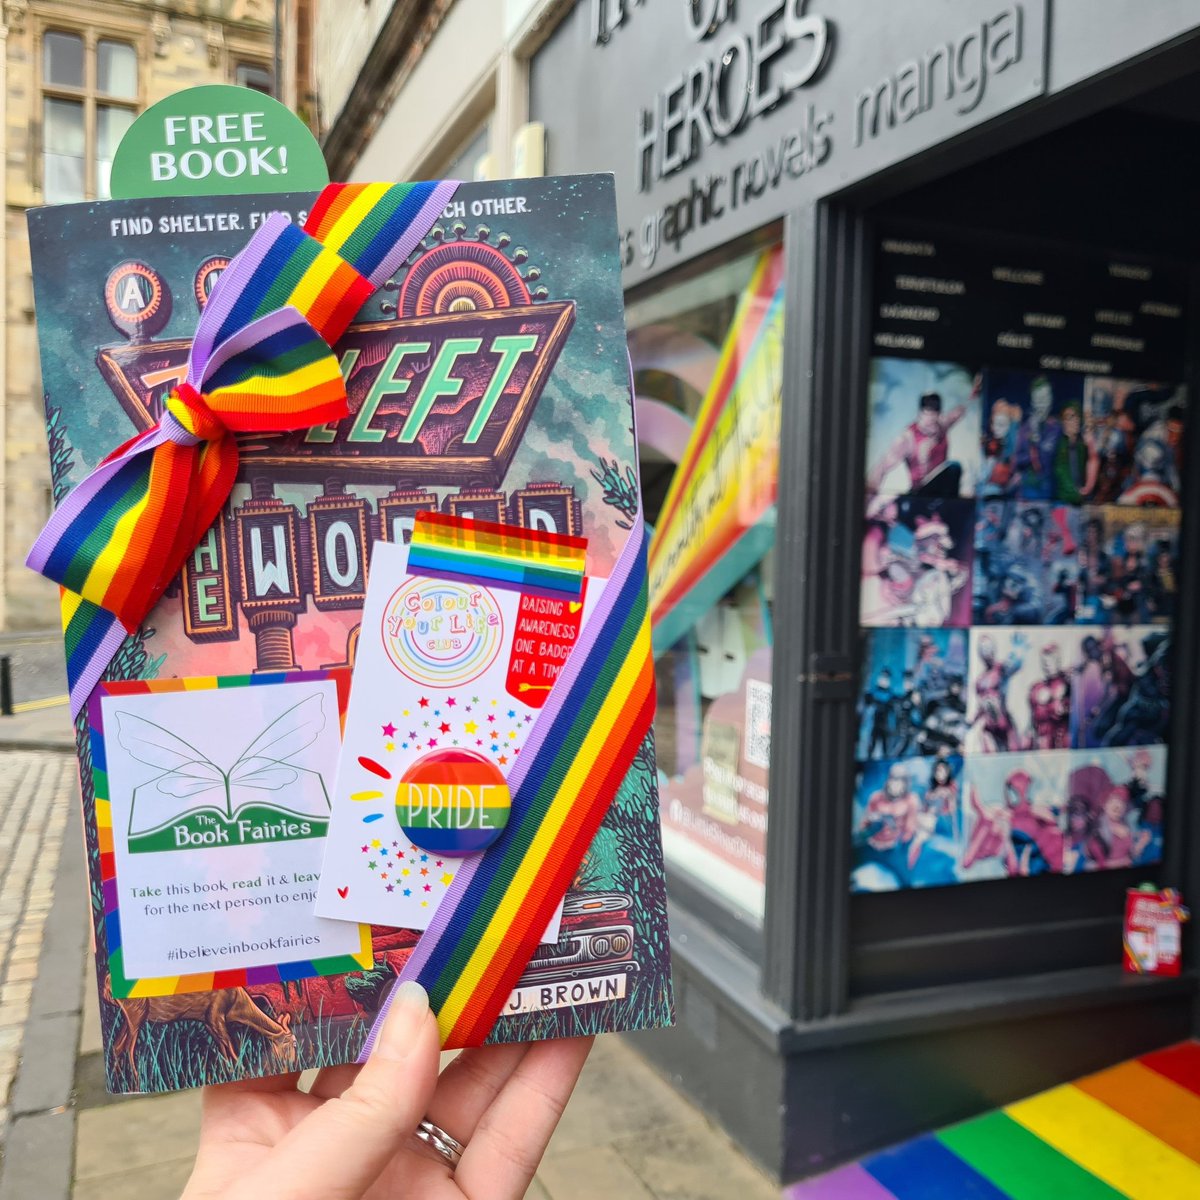 The Book Fairies are celebrating #Pride with Hachette today. #AllThatsLeftintheWorld by #ErikJBrown is hiding out at the Little Shop of Heros in Dunfermline. Look out for an extra special gift from Colour Your Life Club 🌈
#IBelieveInBookFairies #BookFairiesWithPride